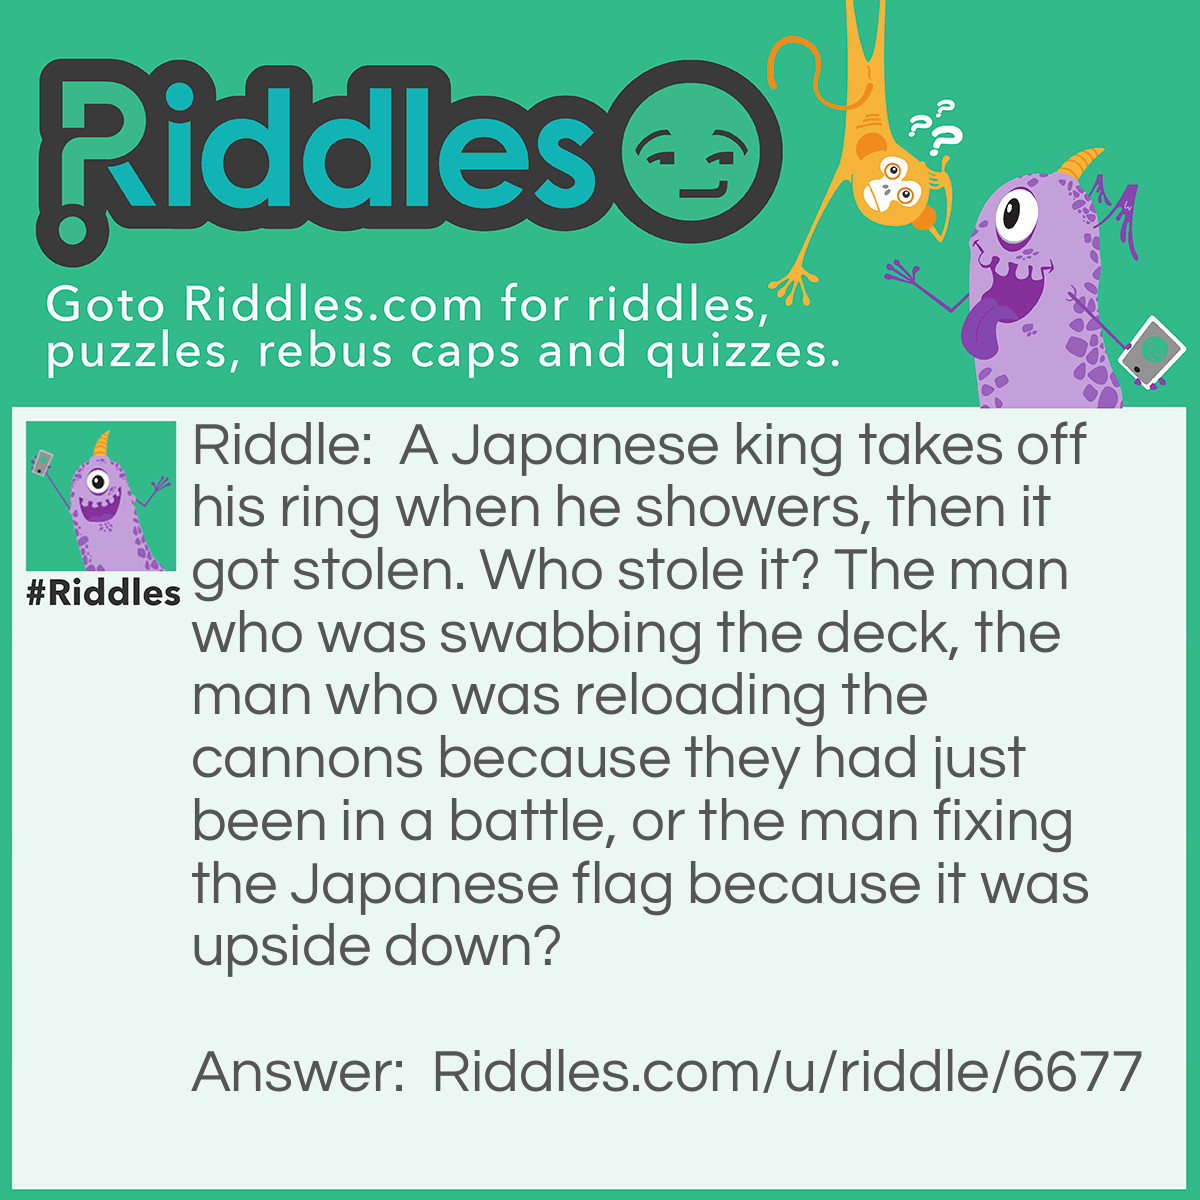 Riddle: A Japanese king takes off his ring when he showers, then it got stolen. Who stole it? The man who was swabbing the deck, the man who was reloading the cannons because they had just been in a battle, or the man fixing the Japanese flag because it was upside down? Answer: The man fixing the flag ( the Japanese flag is just a dot